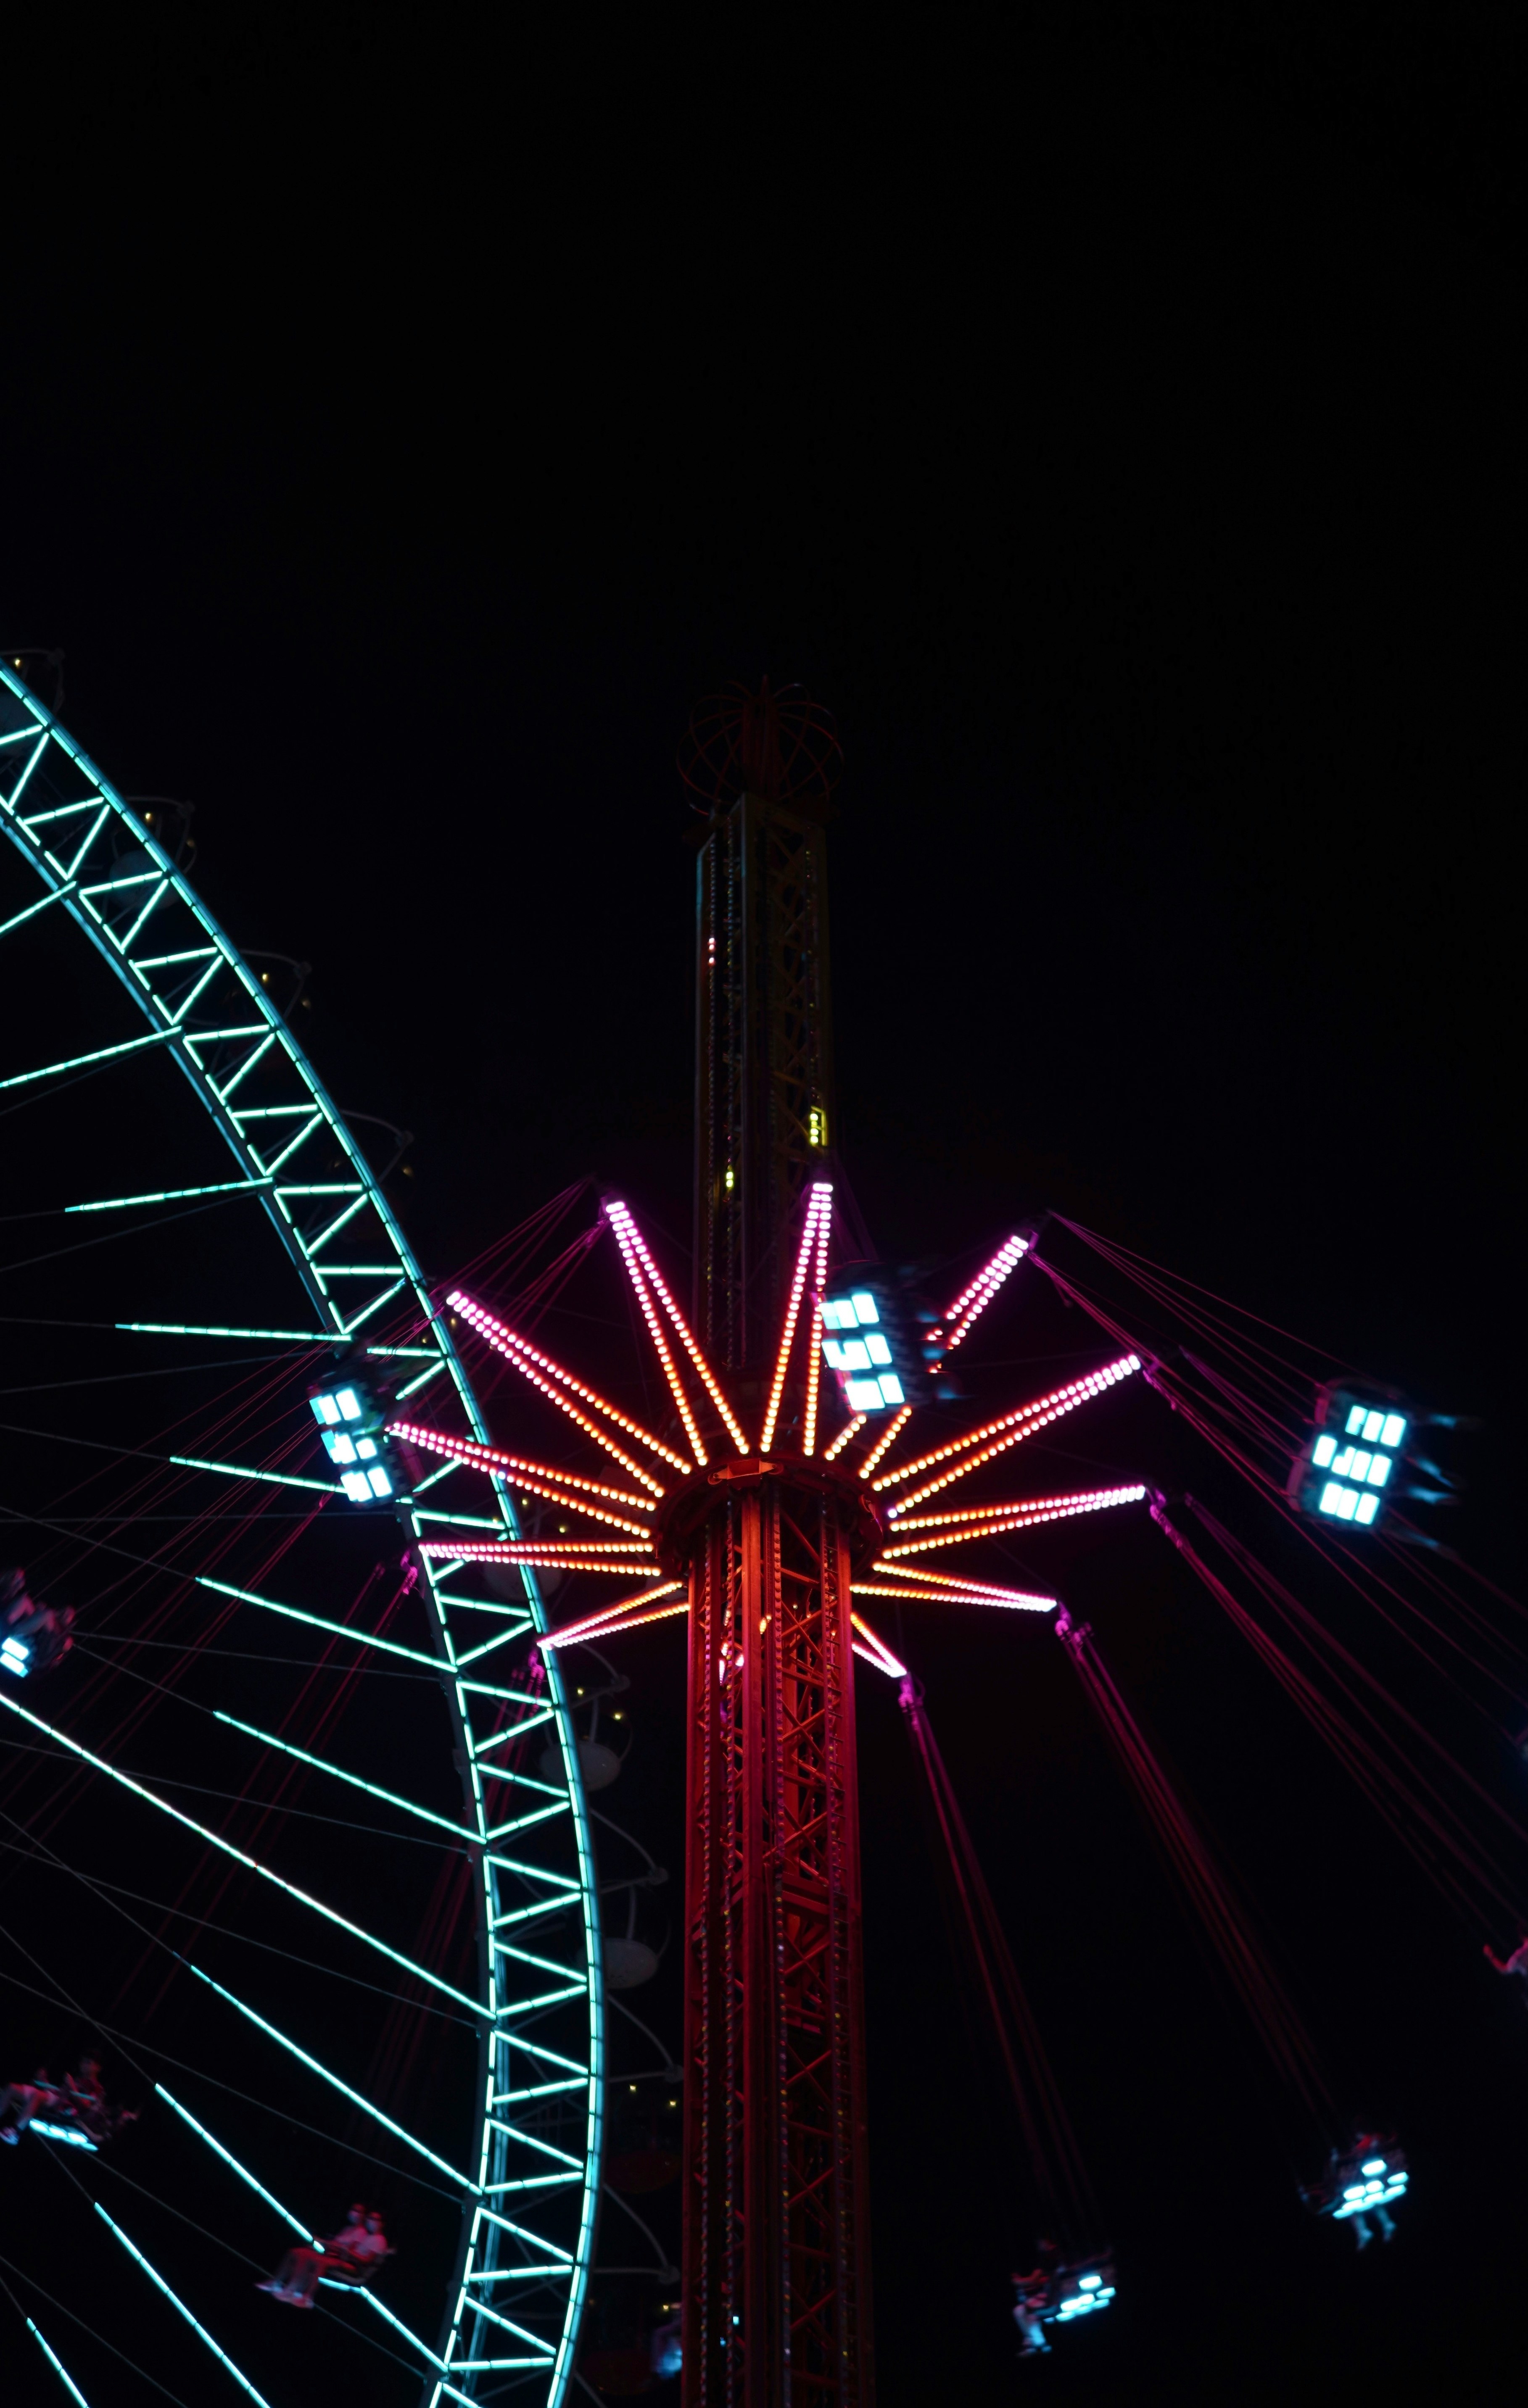 red and black ferris wheel during night time